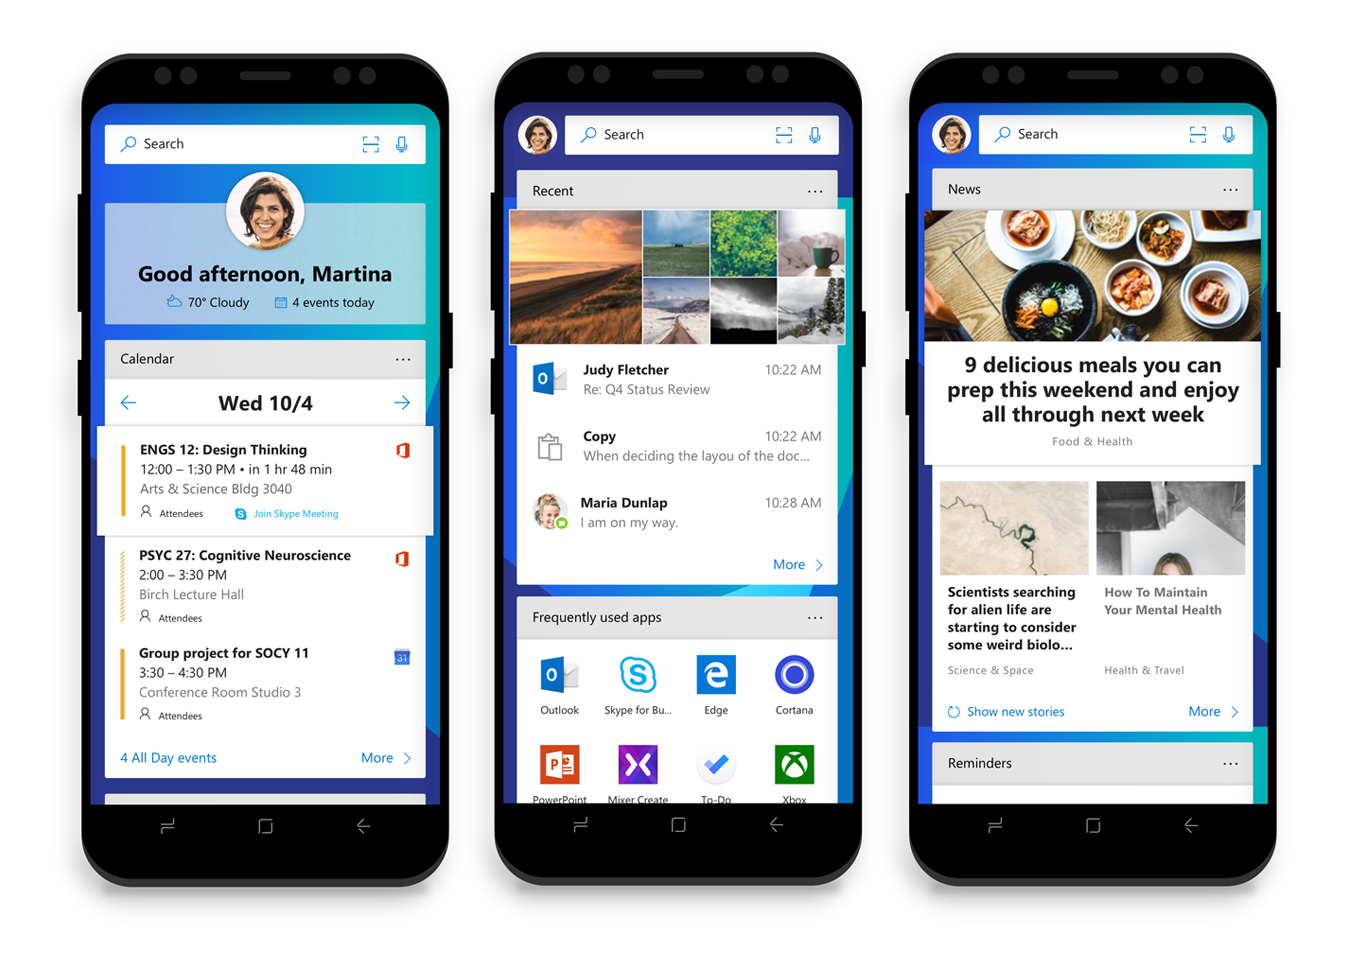 New Microsoft Launcher Beta 5.2 version for Android - January 21 8268874d2e645d4bb0948d74441562cd.png